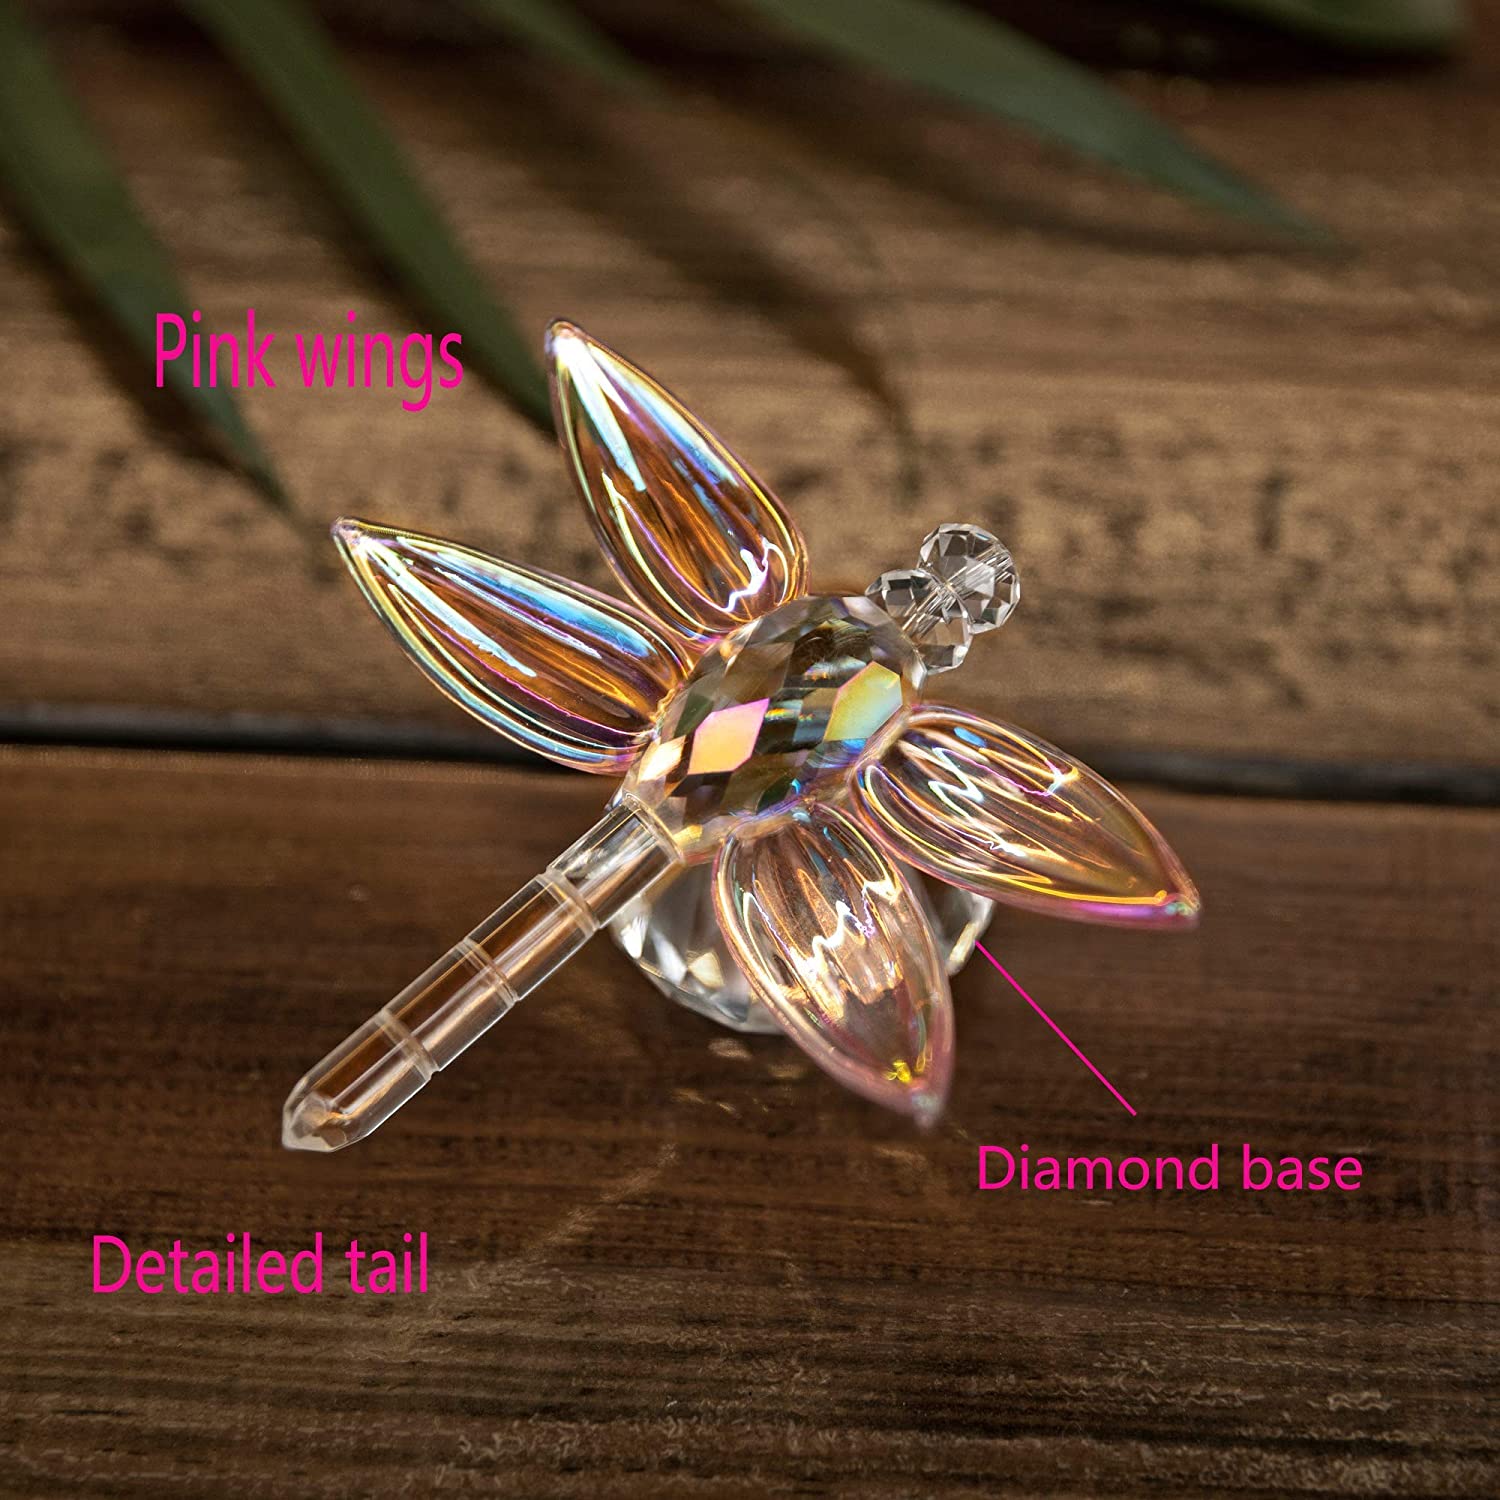 Crystal Dragonfly Figurine Collectible Art Glass Animal Figurines Table Decoration